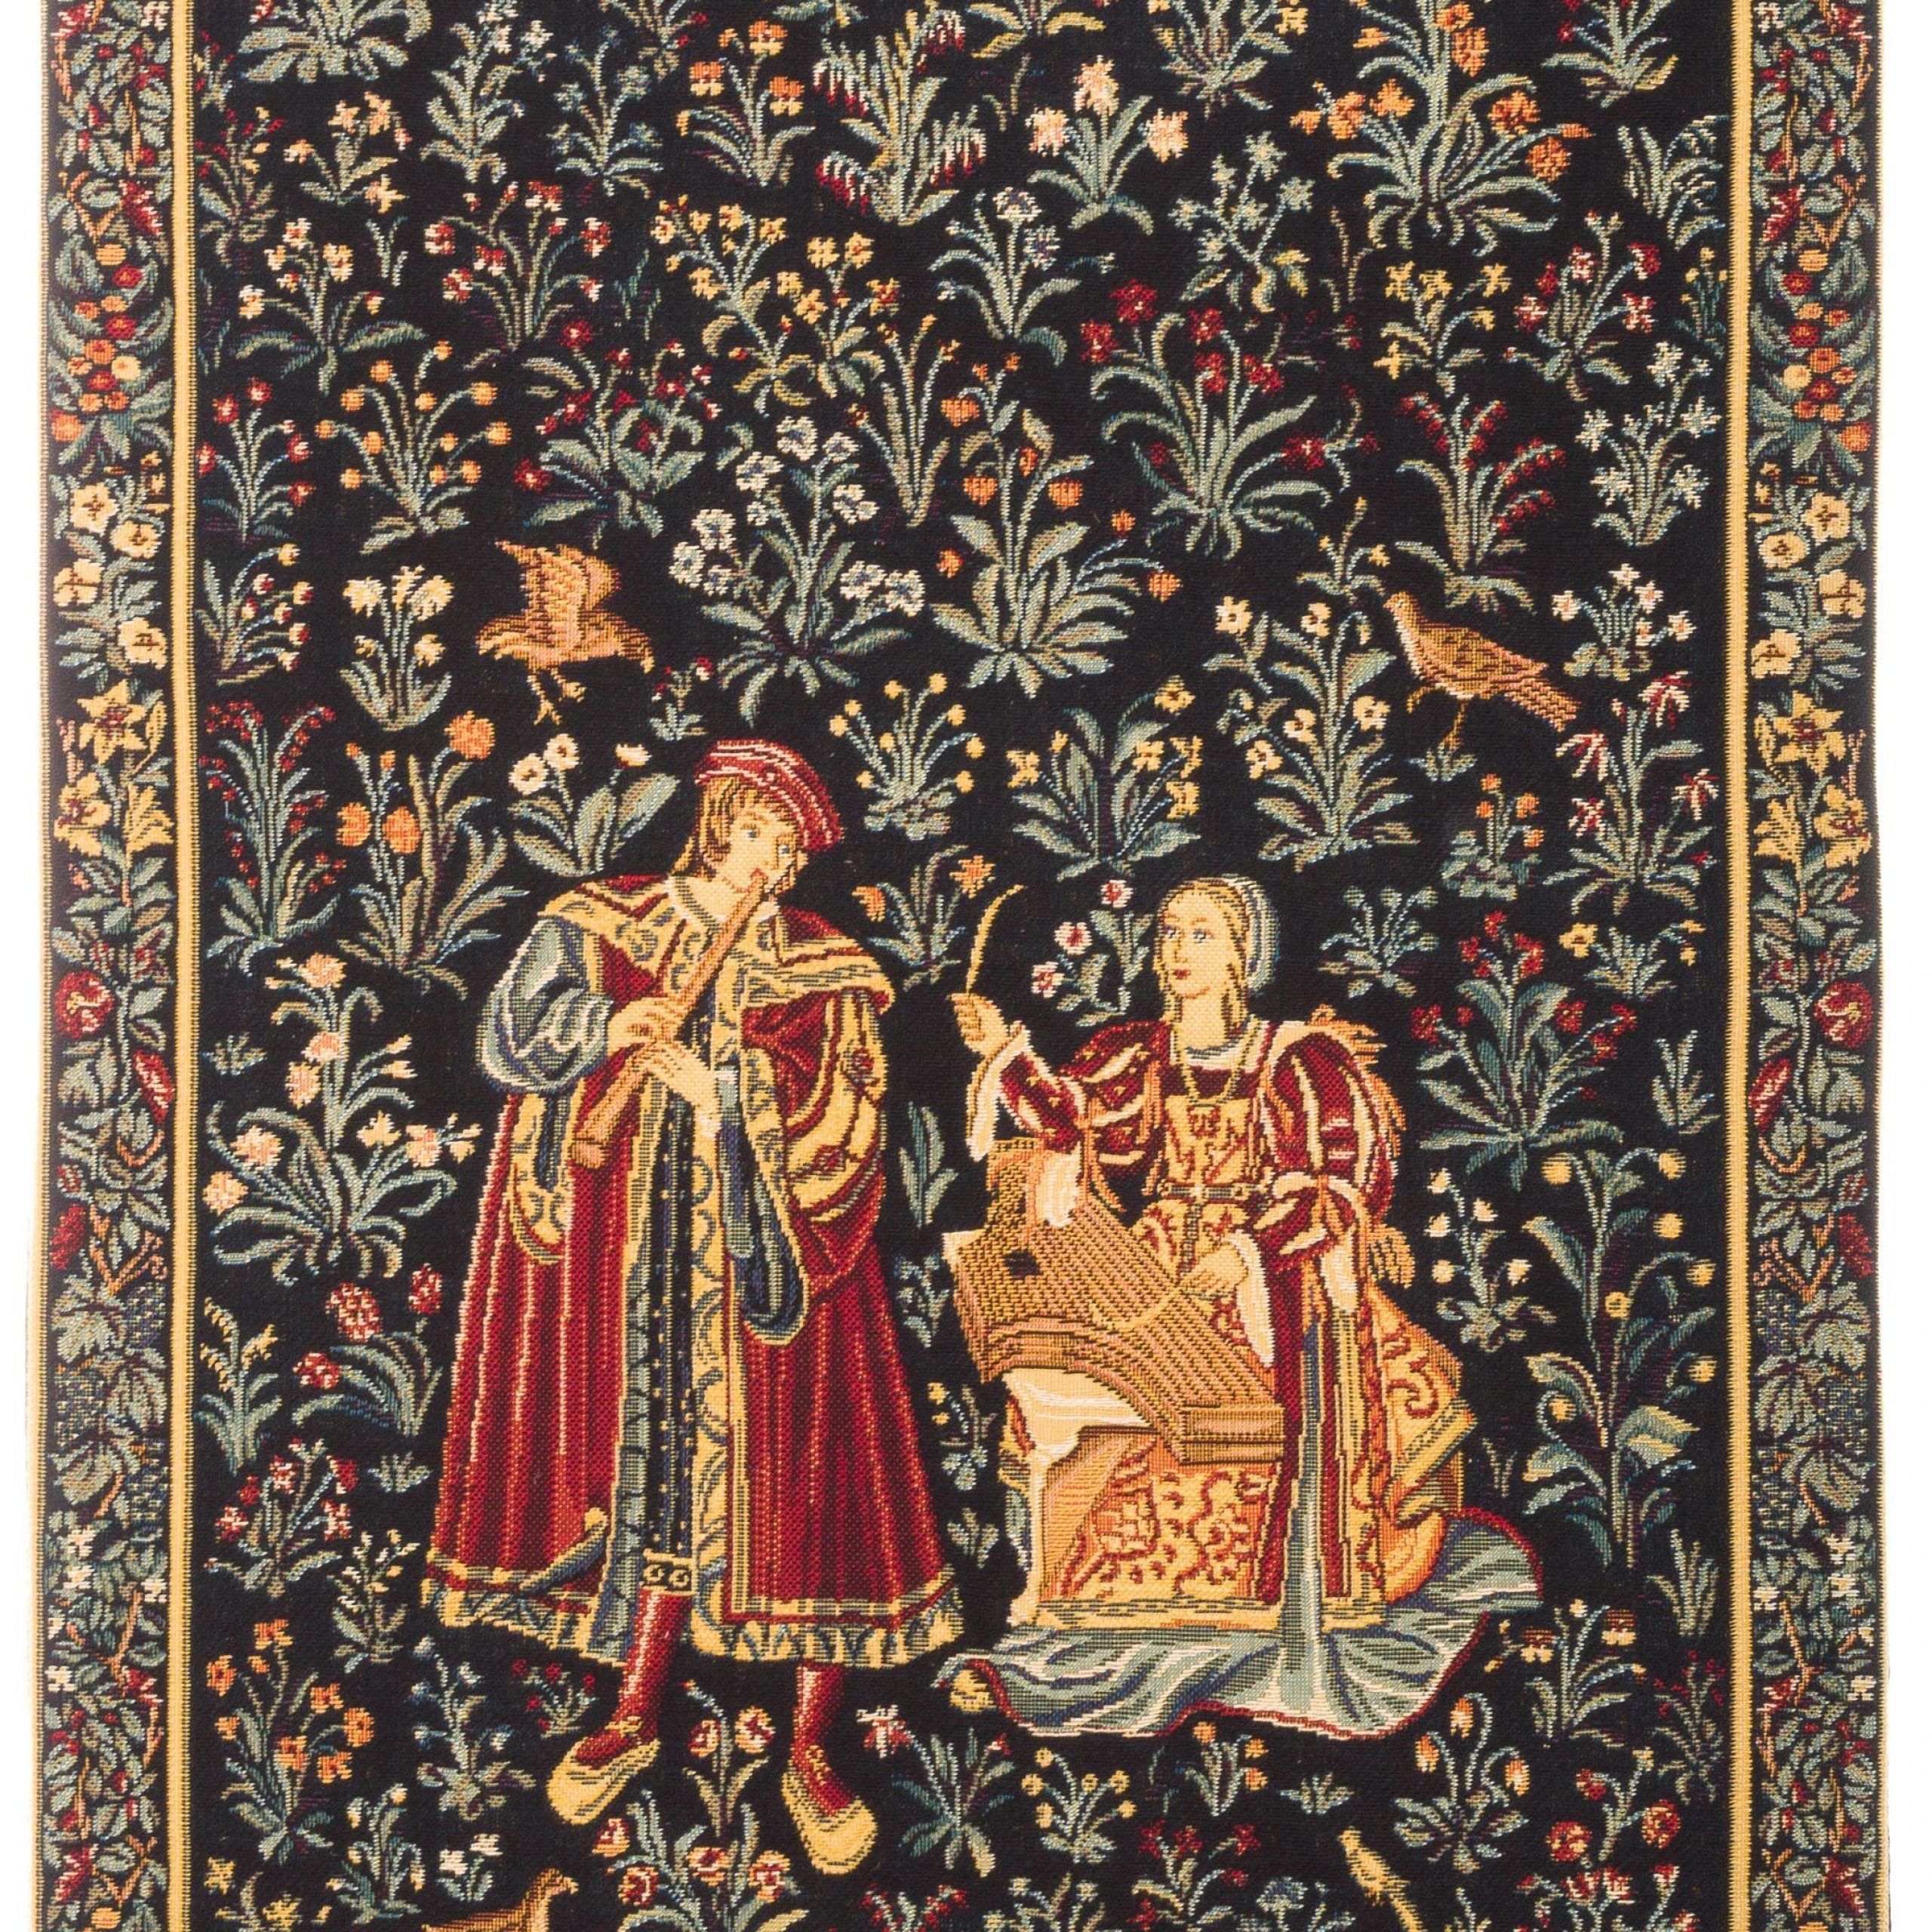 Medieval Tapestry Wall Hanging Concert Scene Millefleurs Within Newest Blended Fabric Wall Hangings With Rod Included (View 20 of 20)